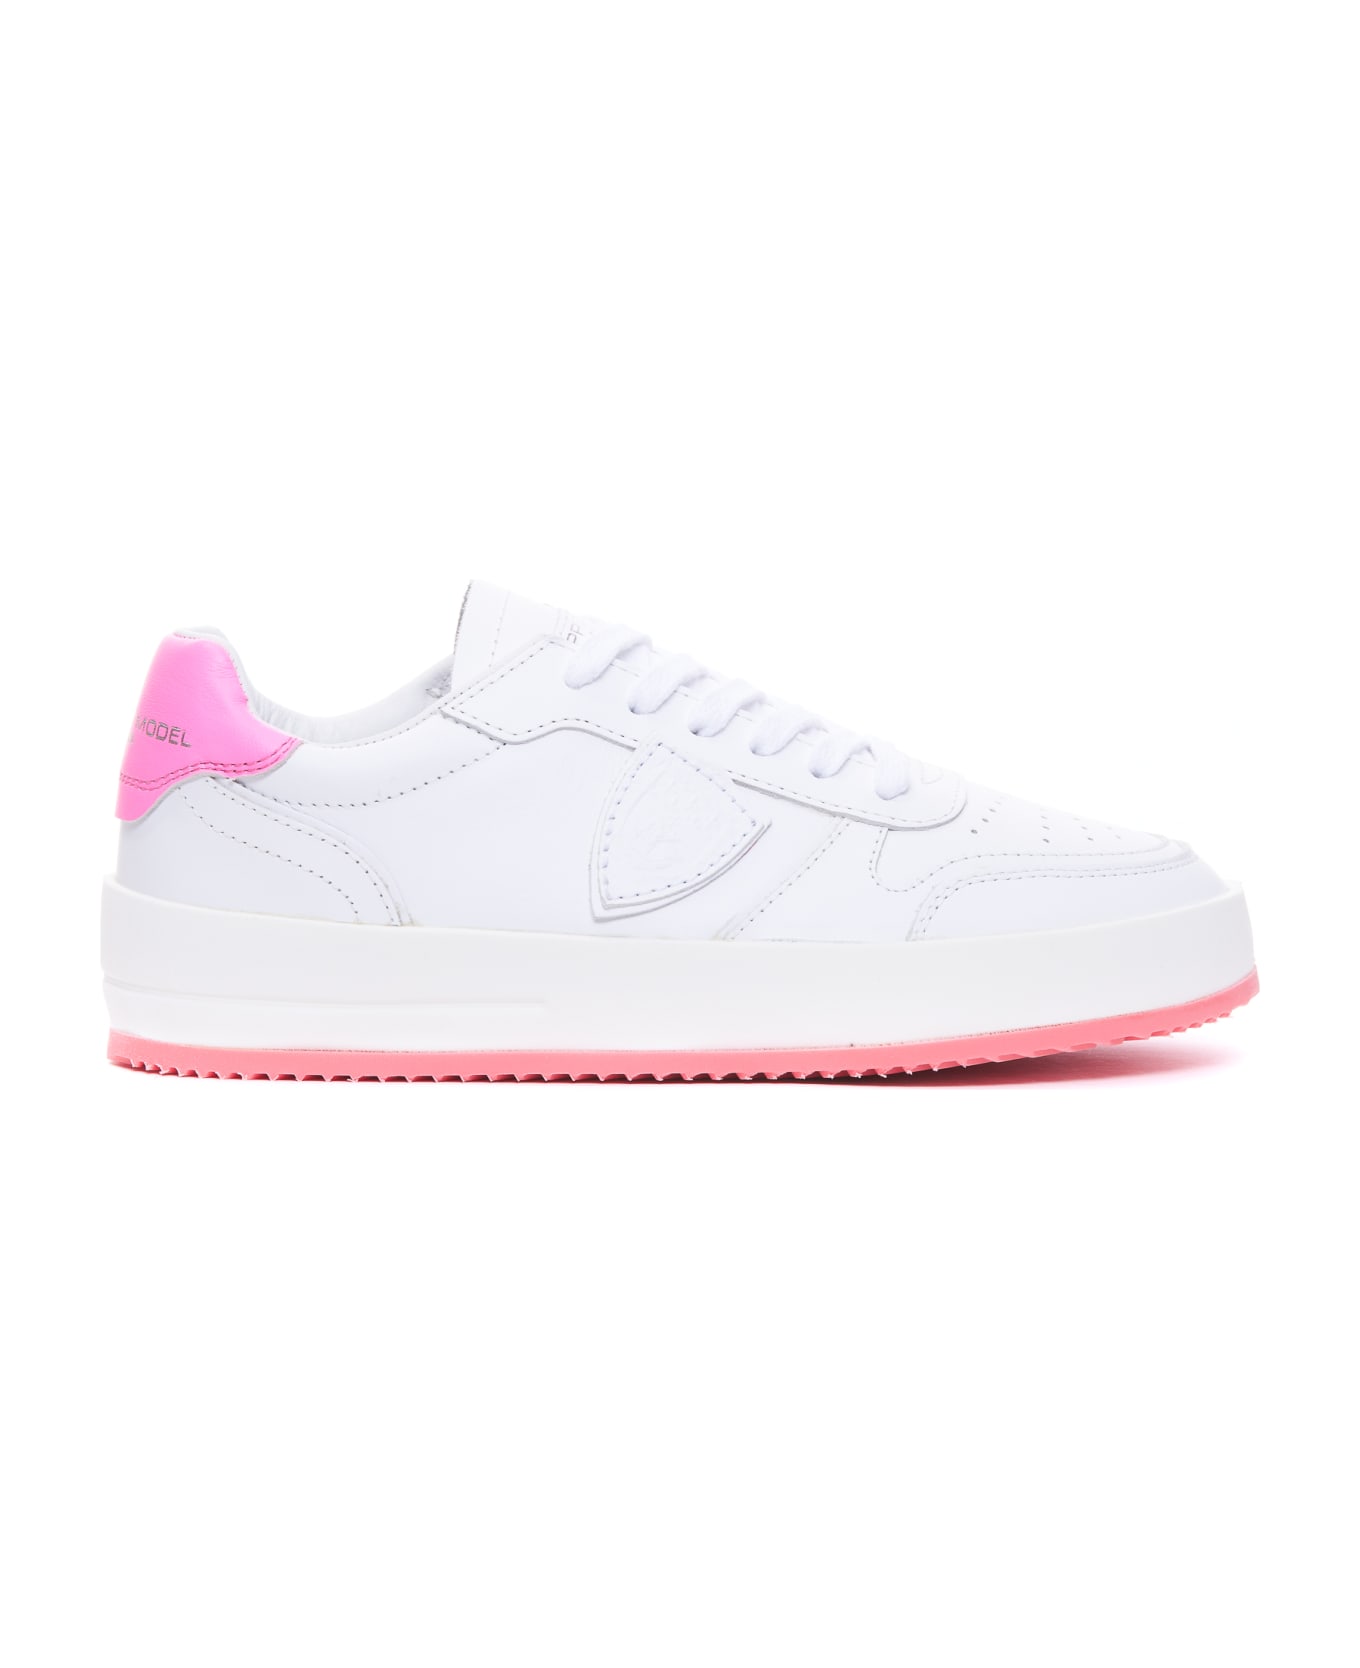 Philippe Model Nice Low Sneakers - White, pink